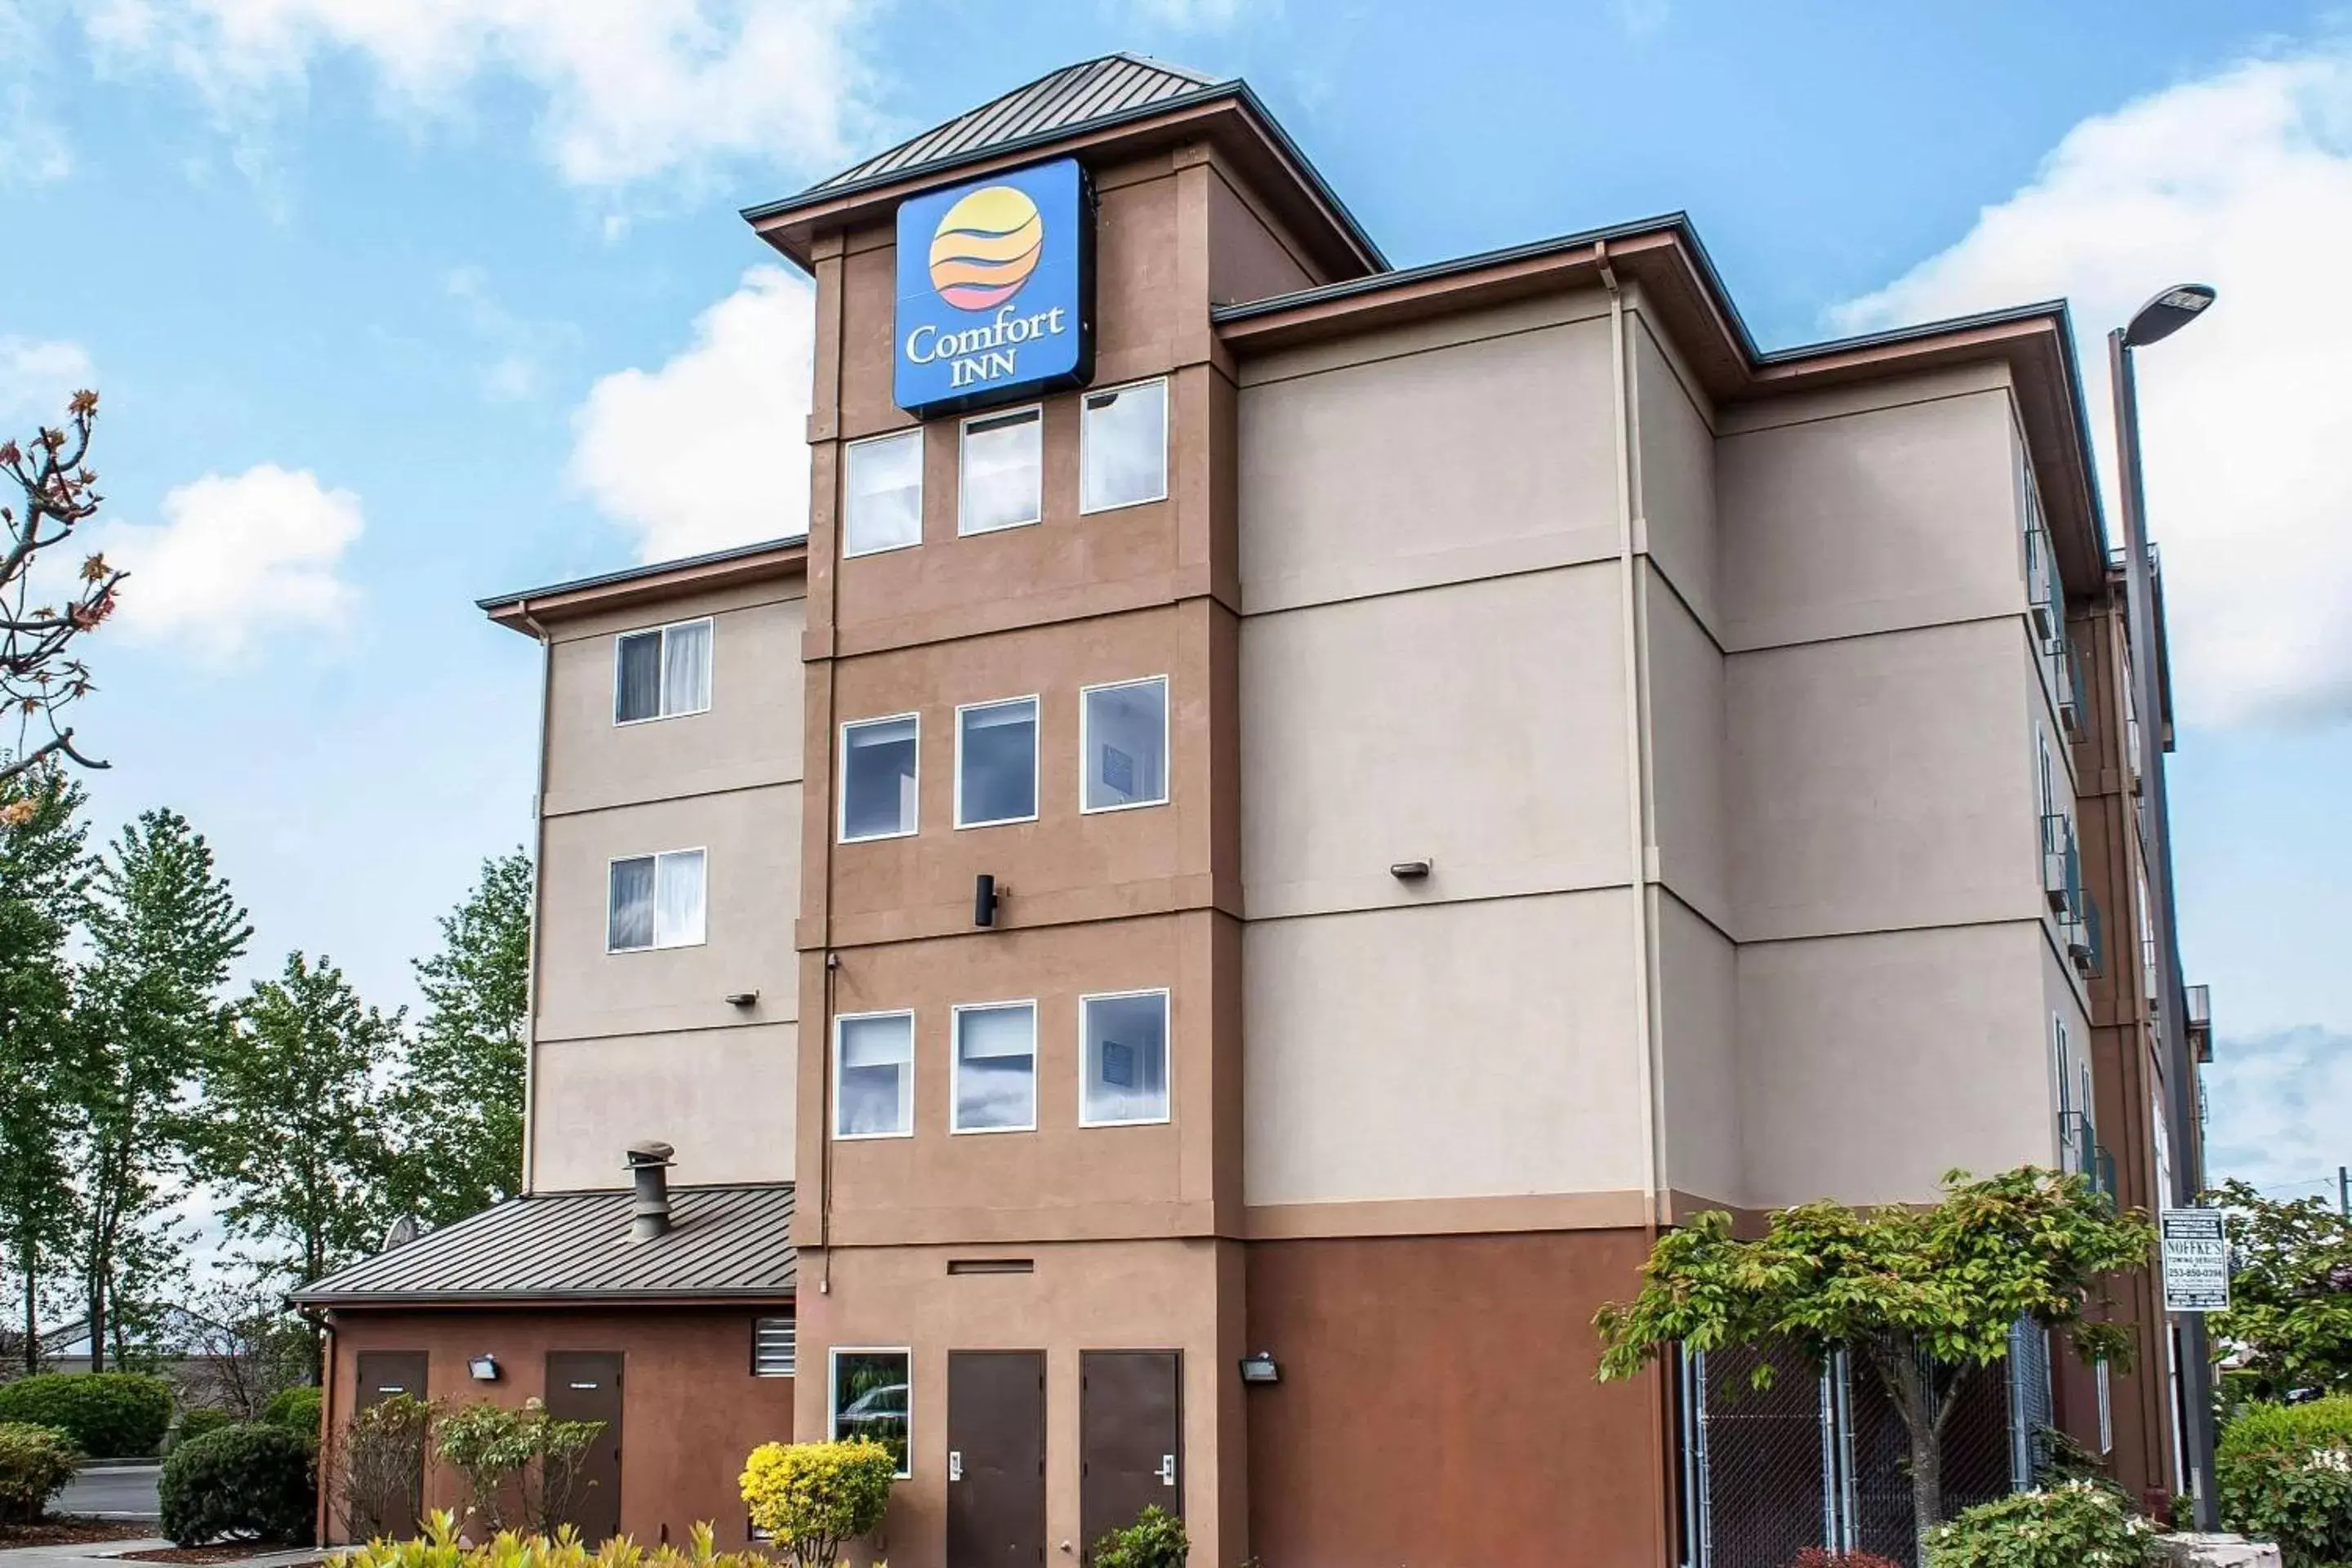 Property Building in Comfort Inn Federal Way - Seattle